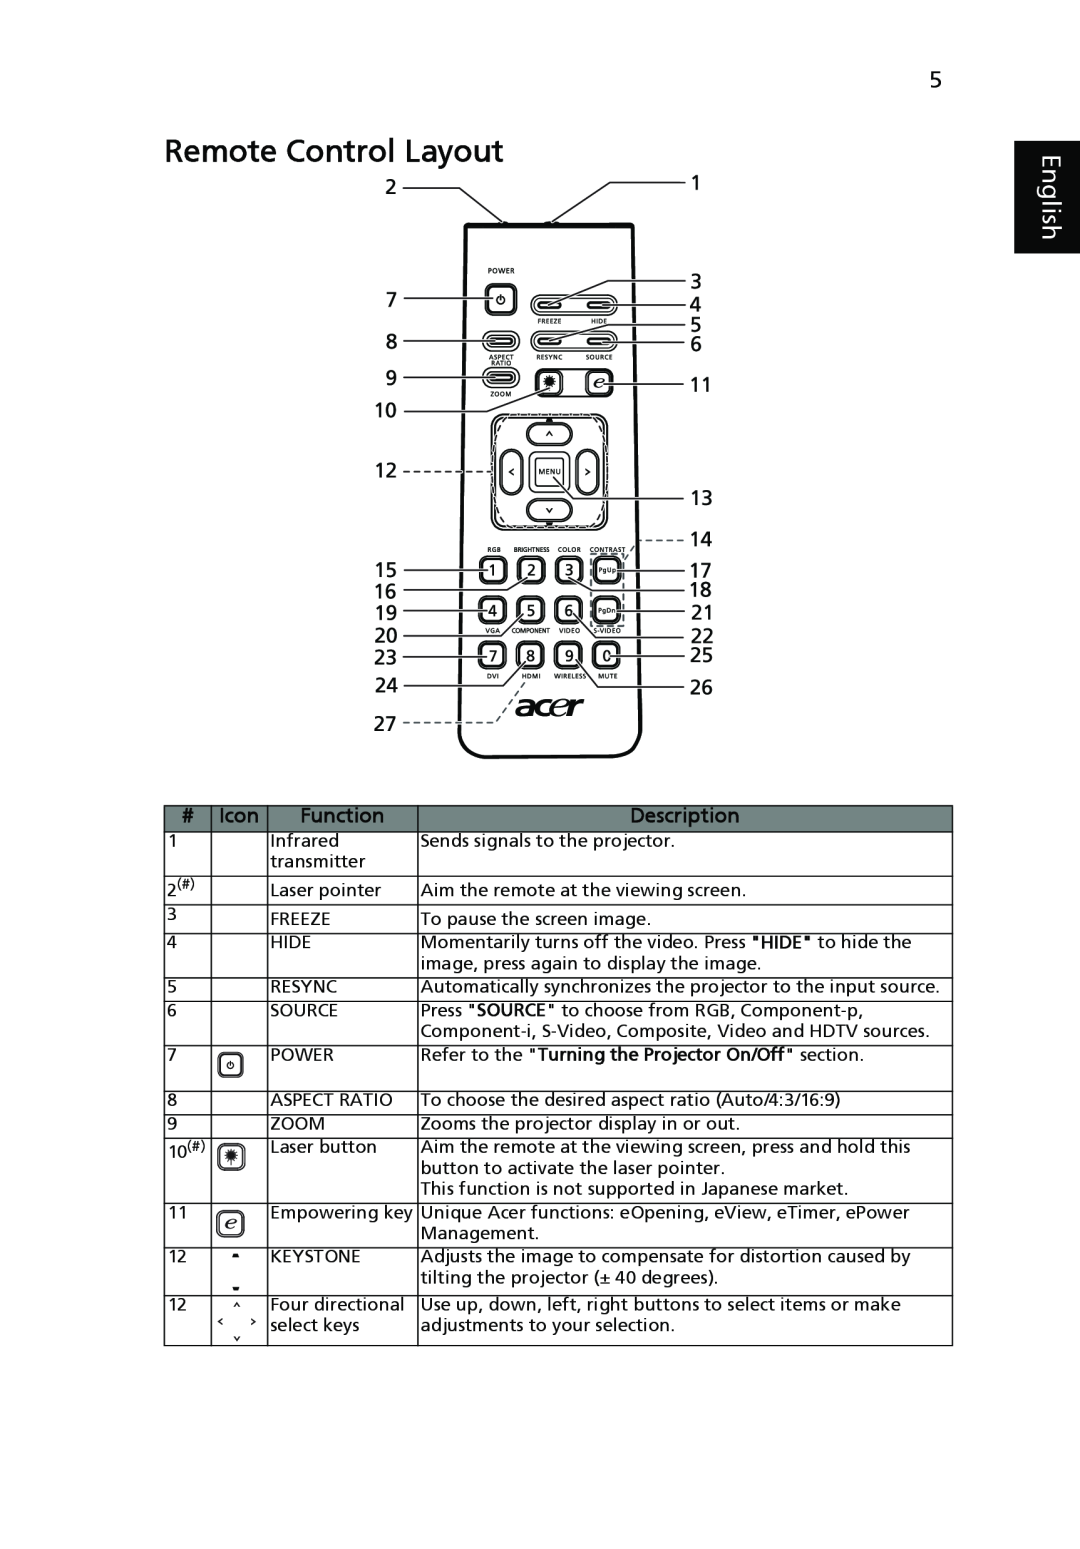 Acer P1166P, P1270, P1266i, P1266N manual Remote Control Layout, English, Refer to the Turning the Projector On/Off section 